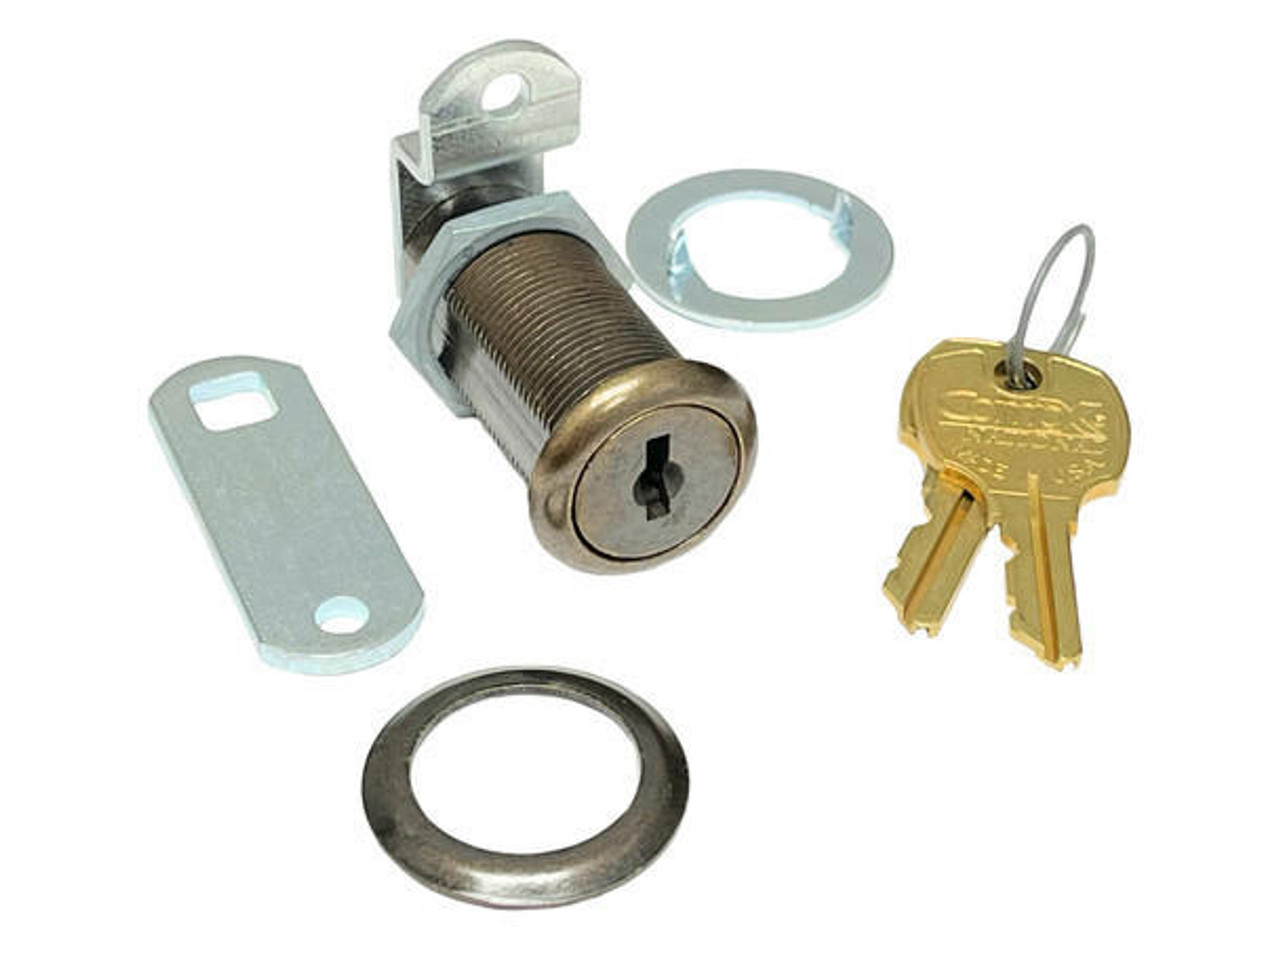 Compx Security Products Compx C8055 disc tumbler cylinder cam lock 